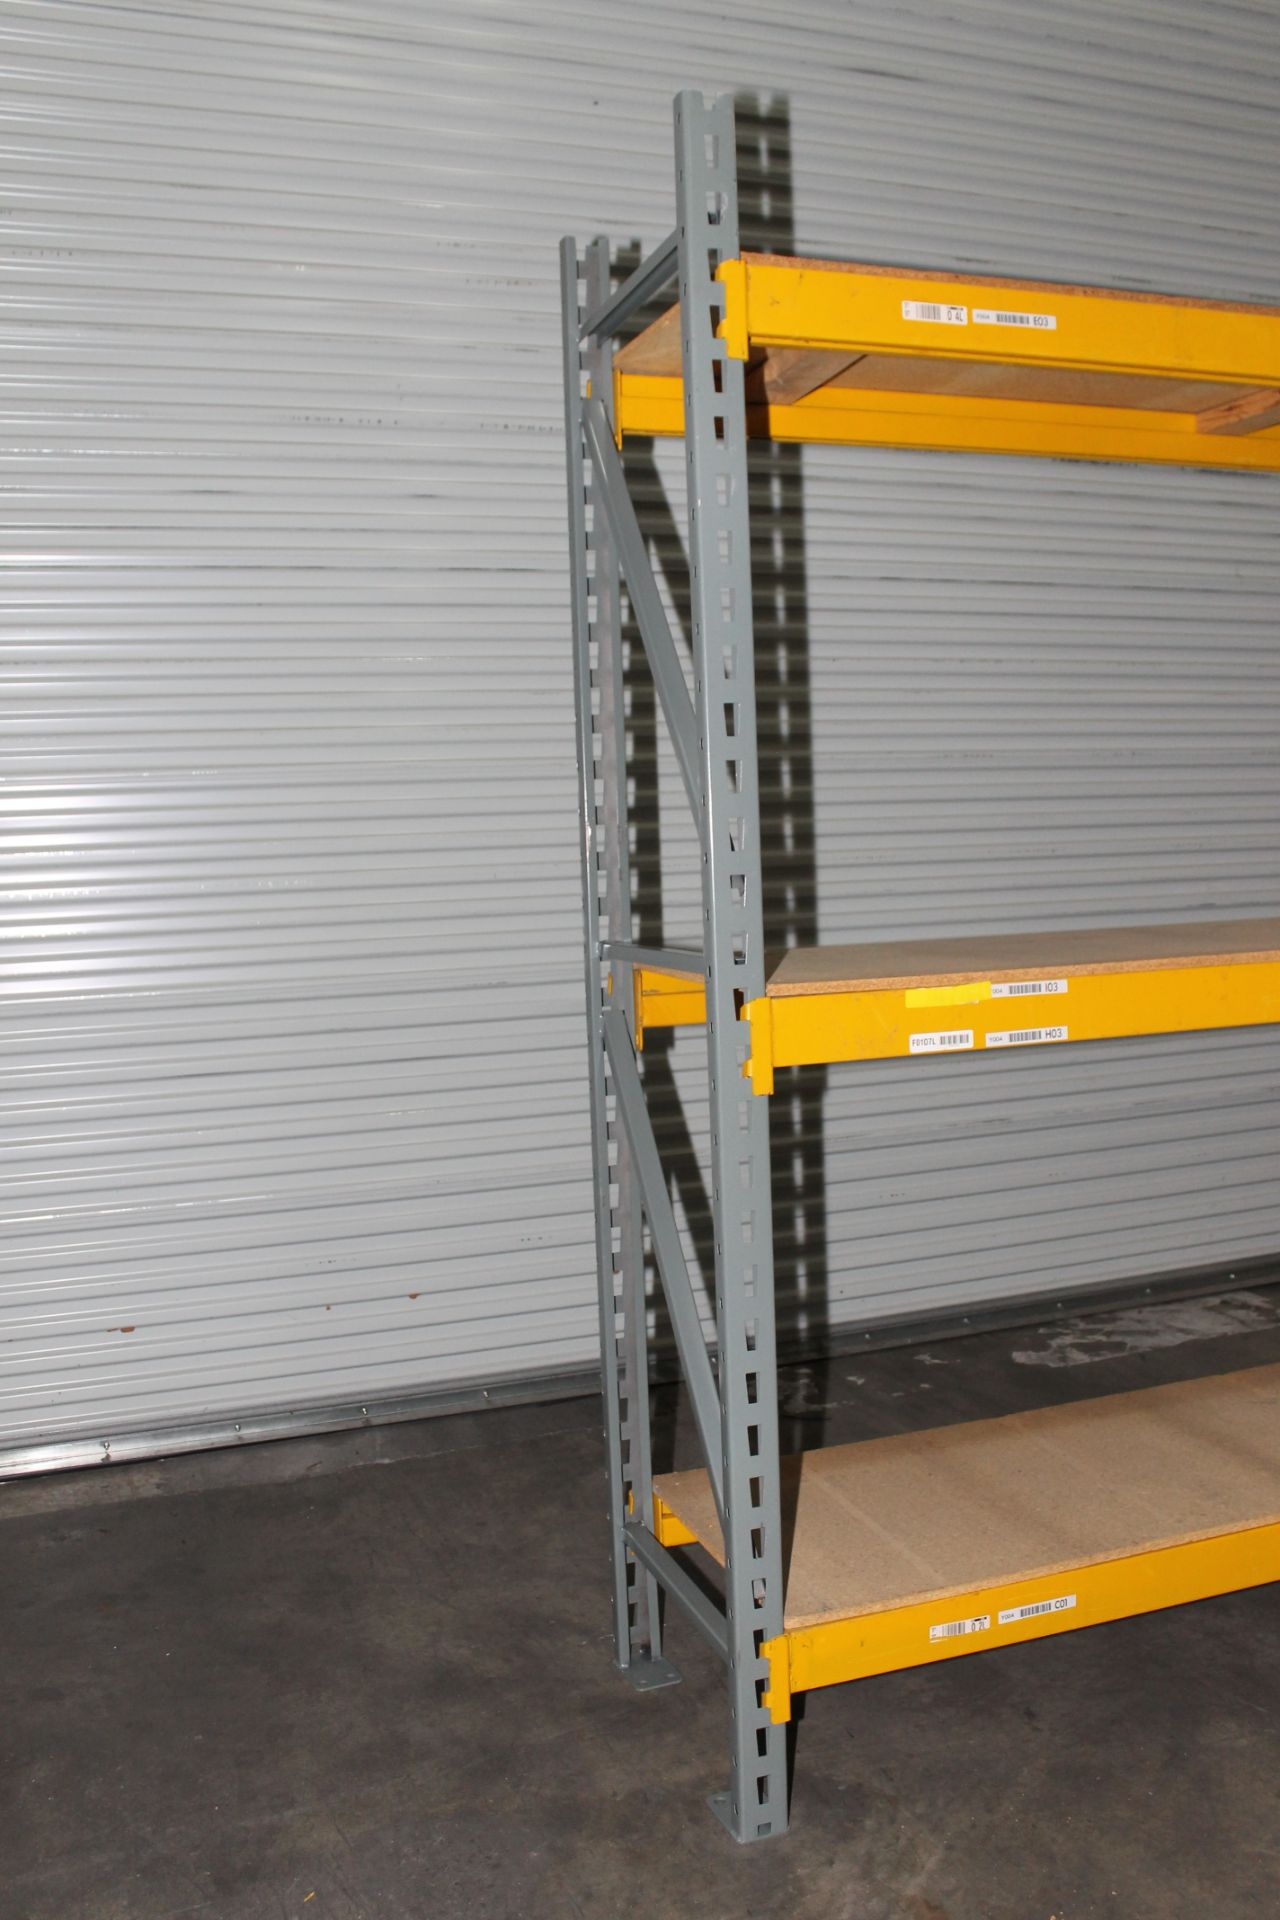 30 SECTIONS OF 96"H X 24"D X 96"L STOCK ROOM PALLET RACK SHELVING,  TOTAL 30 SECTIONS, 3 ROWS - Image 5 of 5